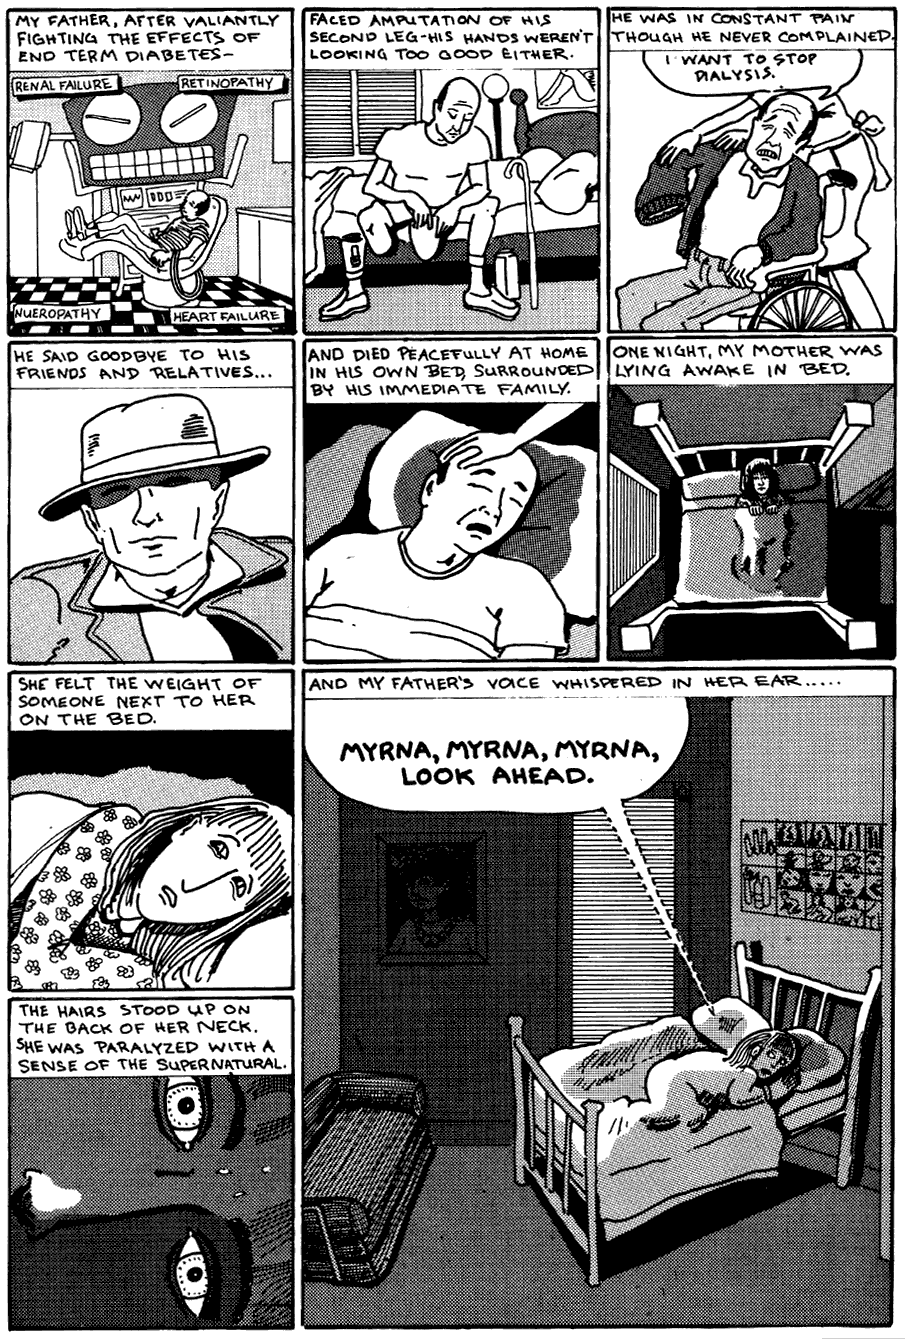 Black and white comic by Joey Epstein: after Epstein's dad dies, his wife Myrna dreams his ghost tells her 'Myrna, Myrna, Myrna, look ahead.'